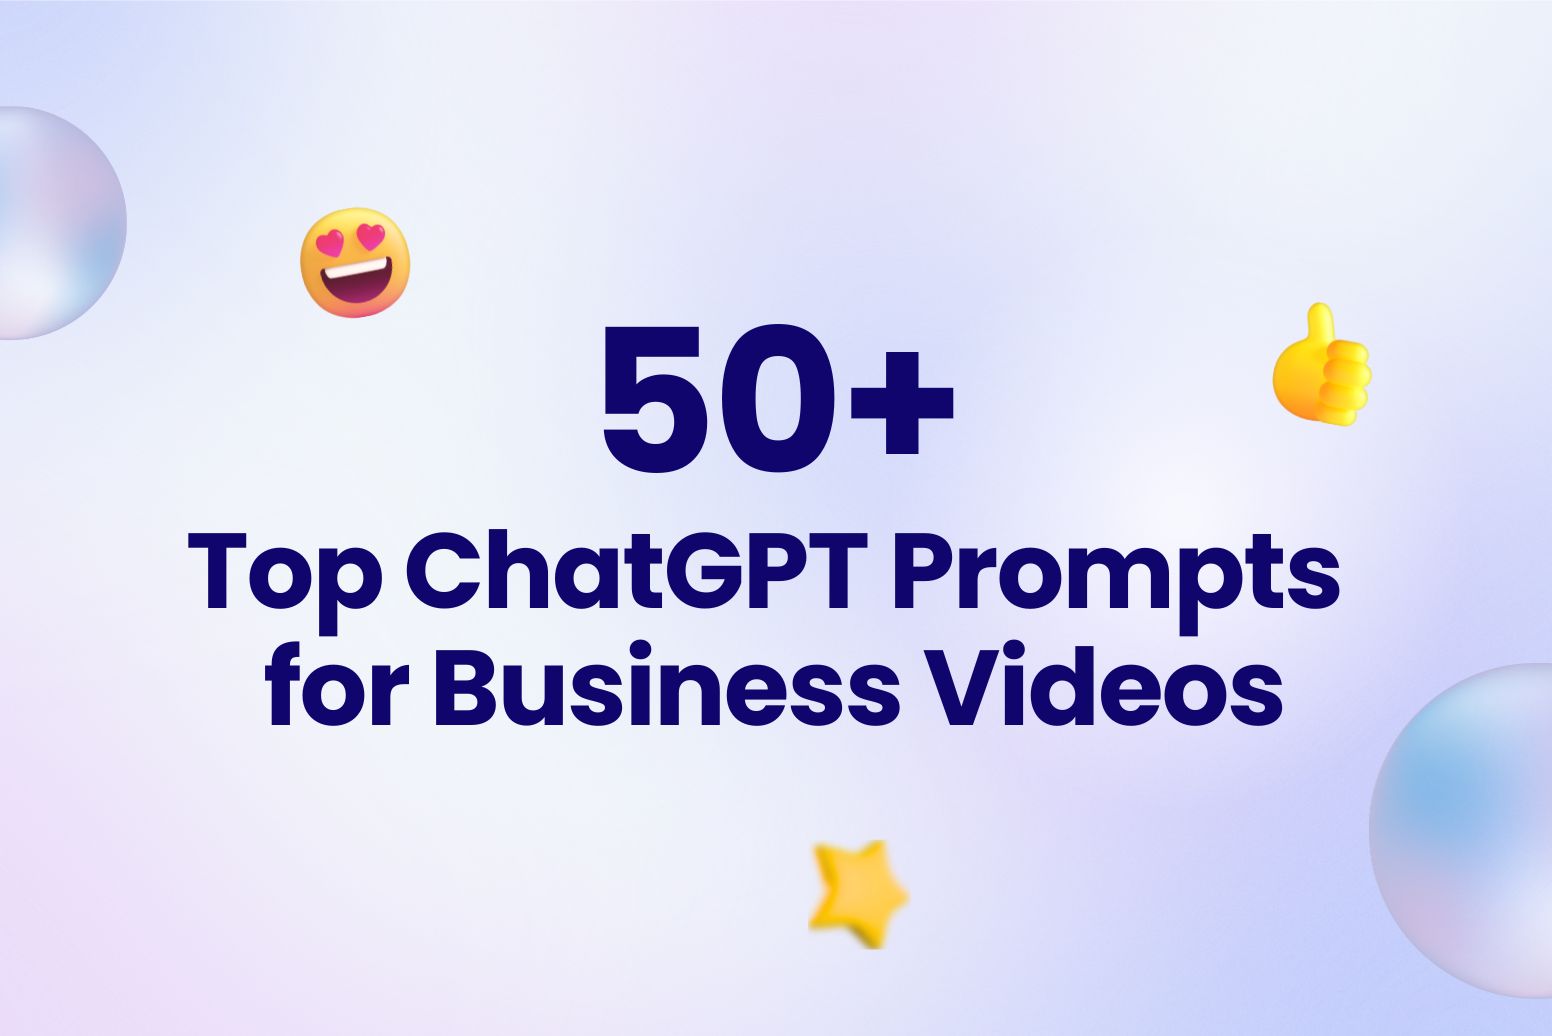 50+ Top ChatGPT Prompts for Business Videos